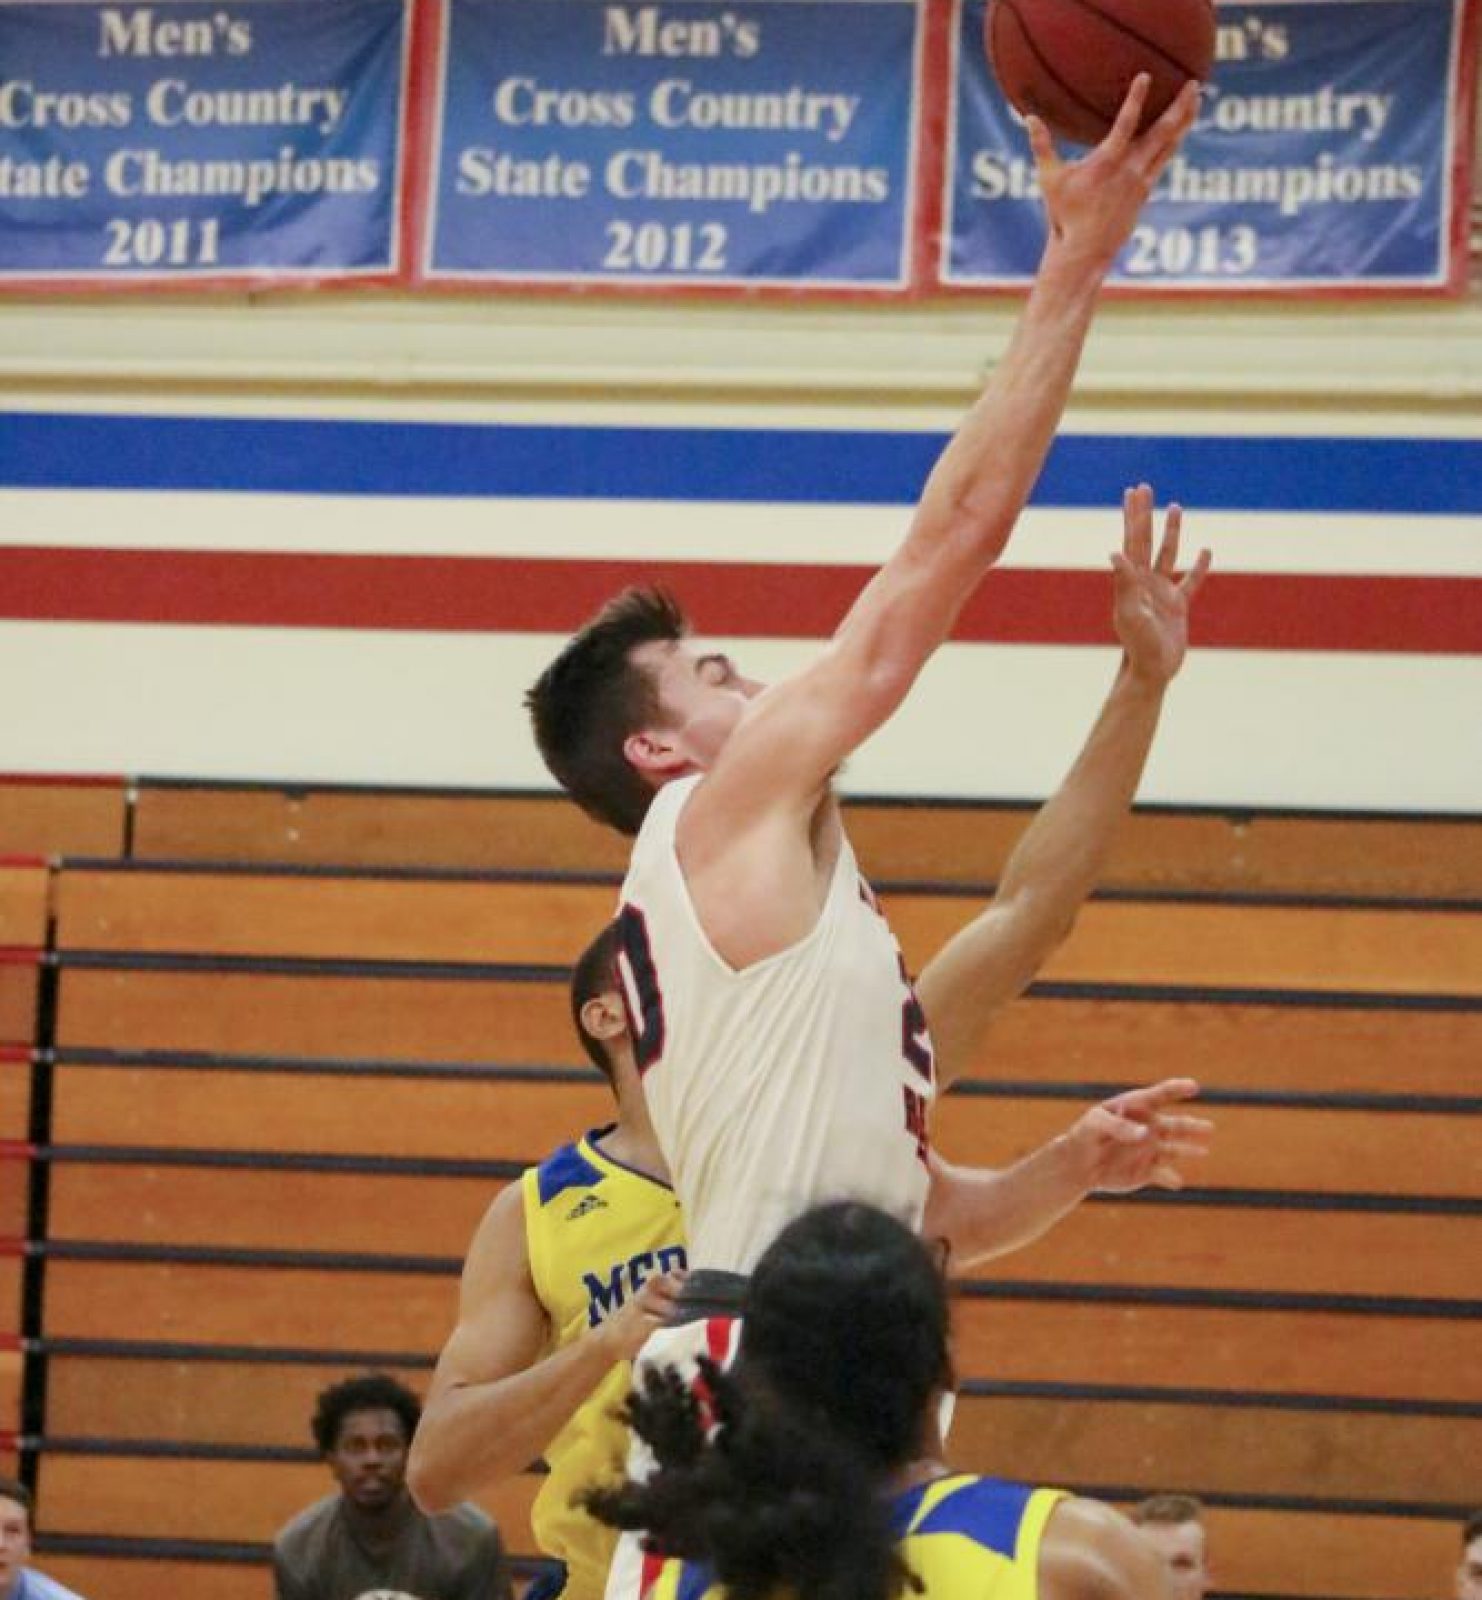 American River College sophomore small forward Parker Haven shoots the ball against Merritt Community College in the first round of the NorCal Regional Playoffs on Feb. 27, 2019 at ARC. The Beavers won the game, 79-69, and move on to play Gavilan College in Gilroy, on March 2. (Photo by Jennah Booth)